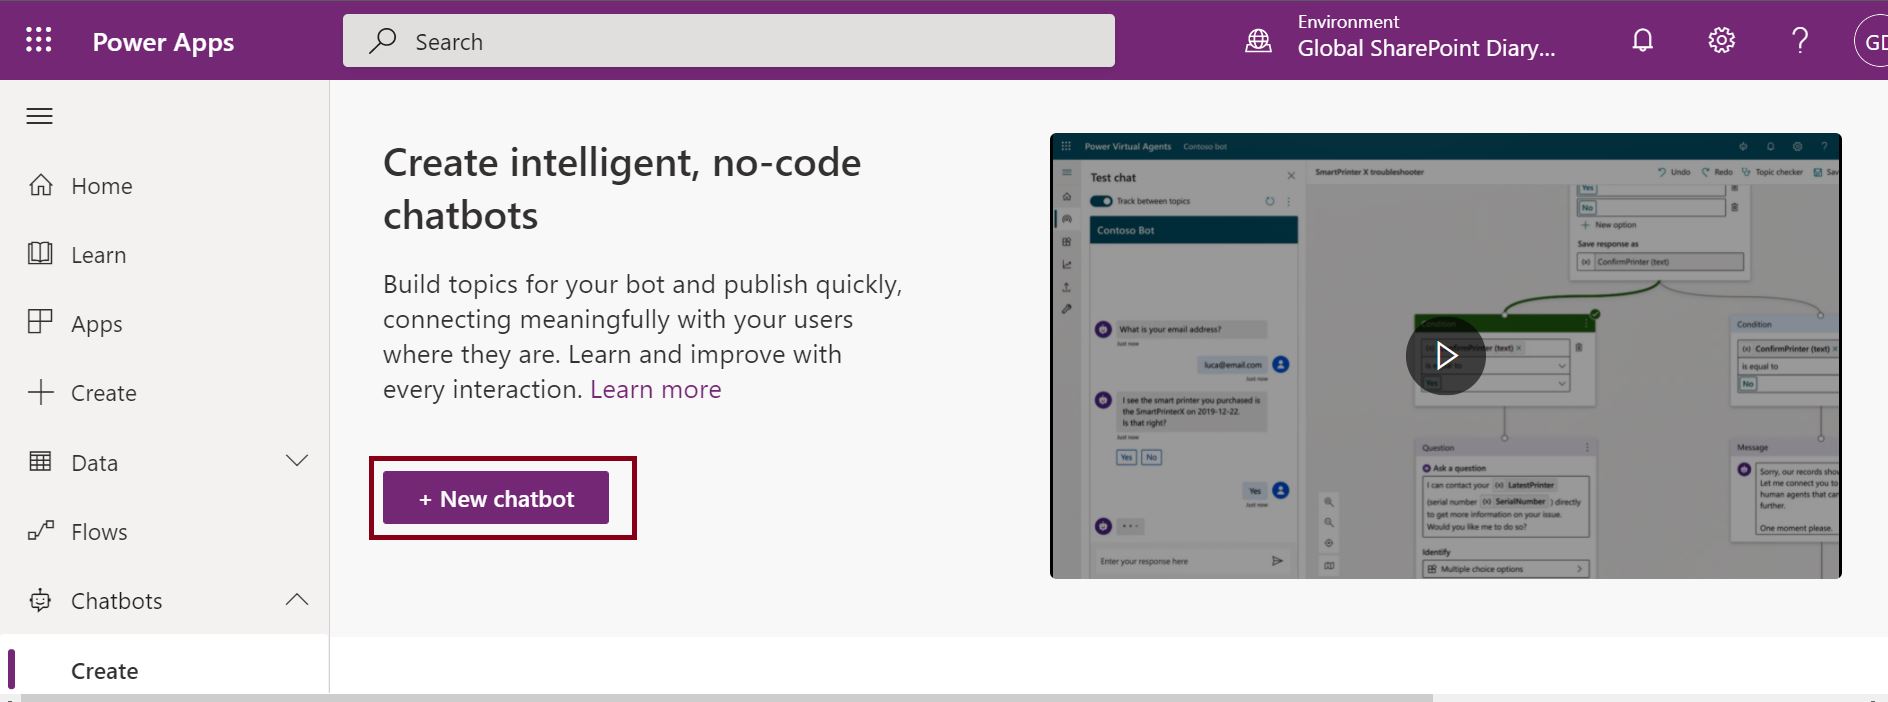 Create intelligent, no-code chatbots using PowerApps